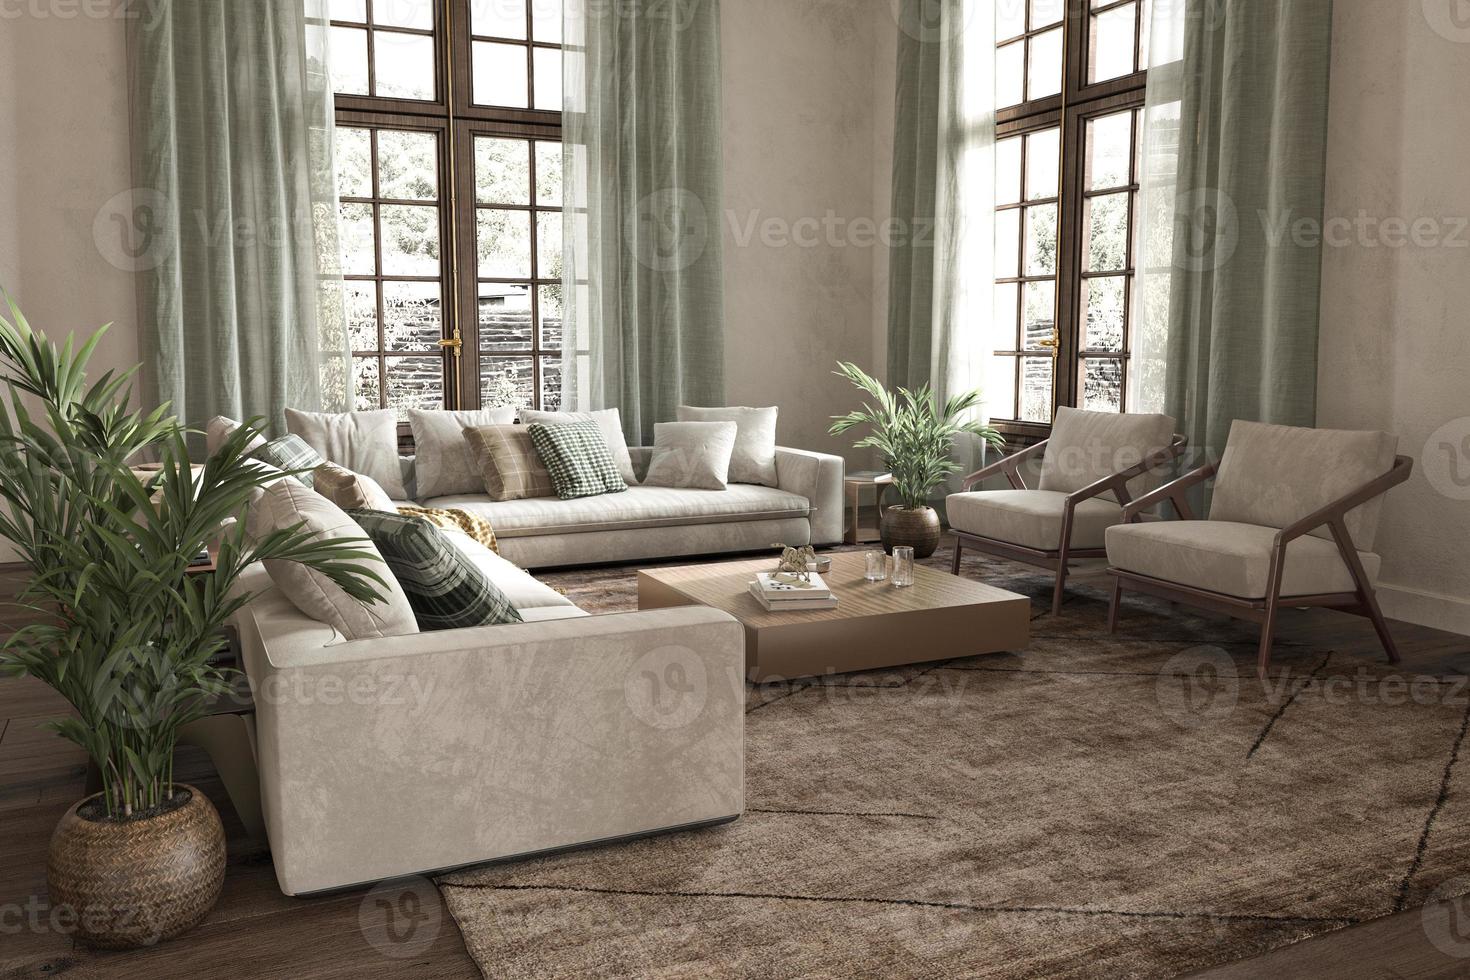 Modern interior japandi design living room. Lighting and sunny apartment with large windows and view nature.  Hampton style 3d render illustration. photo